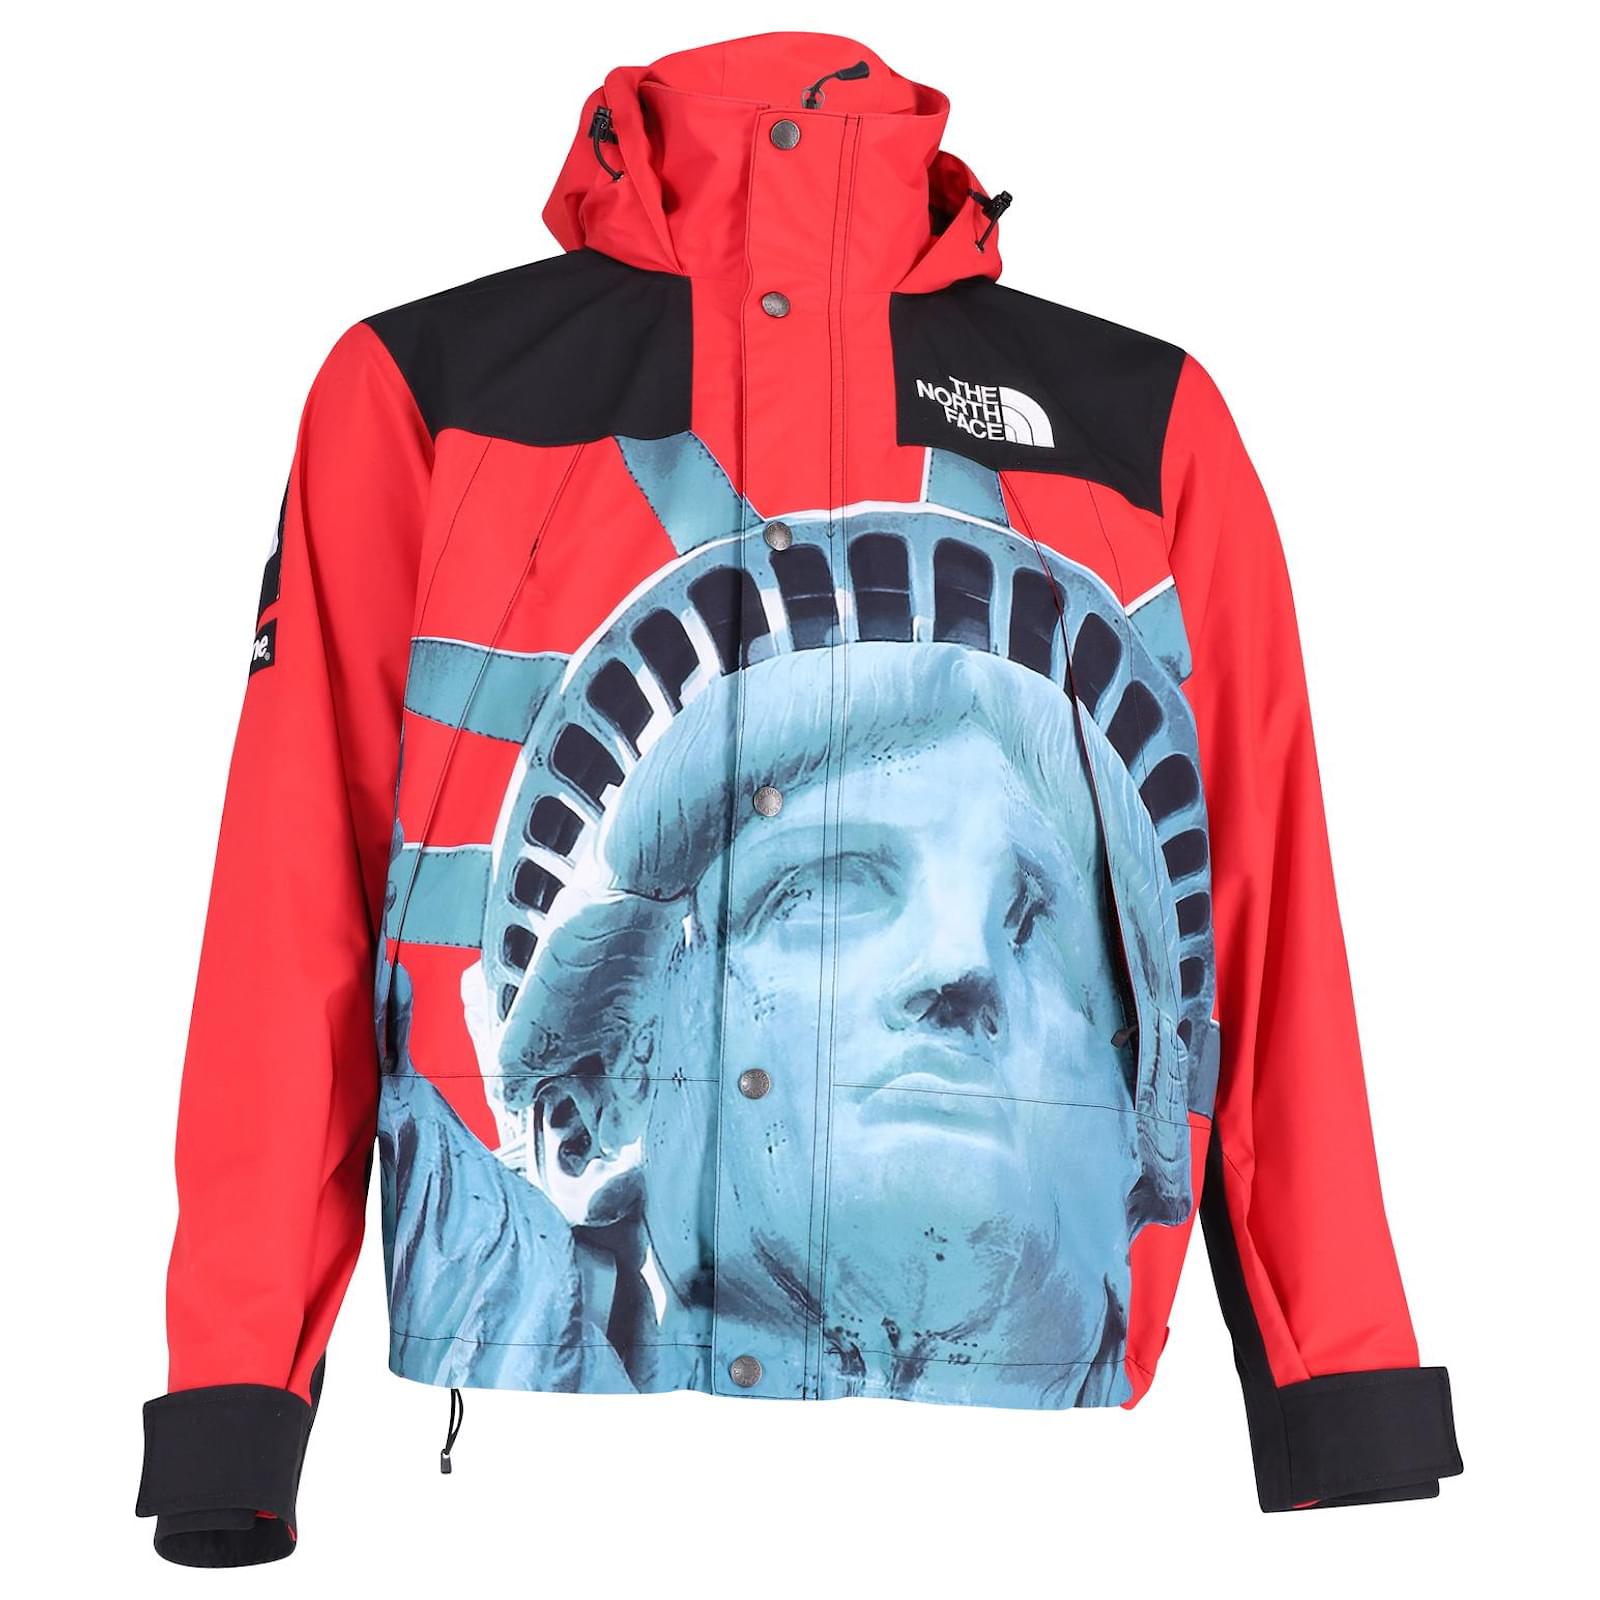 Supreme x The North Face Statue of Liberty Mountain Jacket in Red